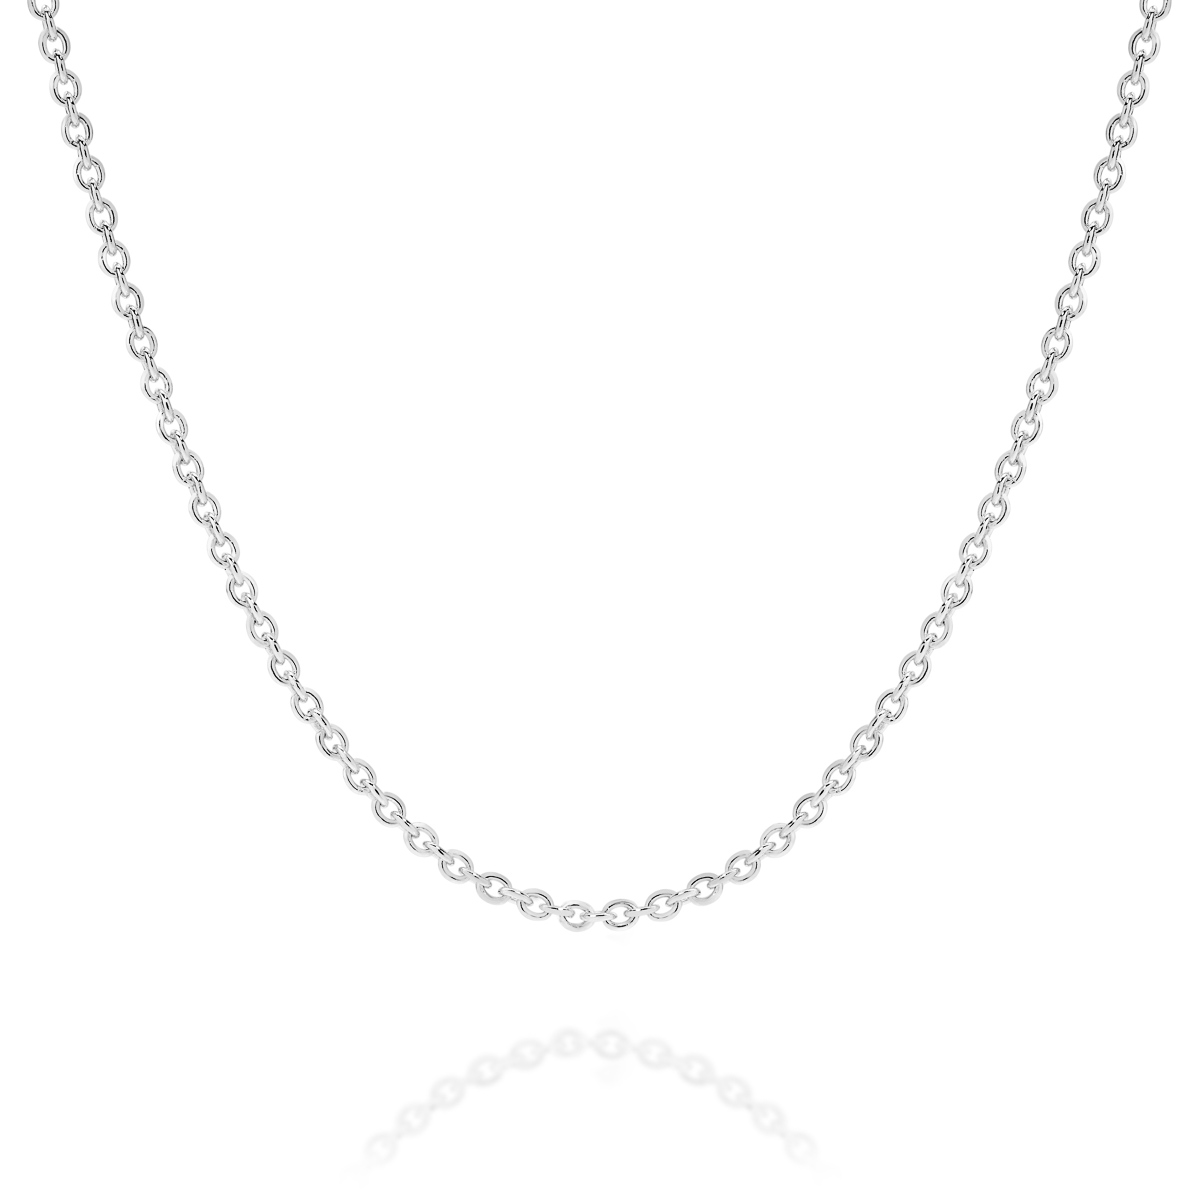 18K White Gold Oval Link Polished Finish Chain- Petite | RS030 WG